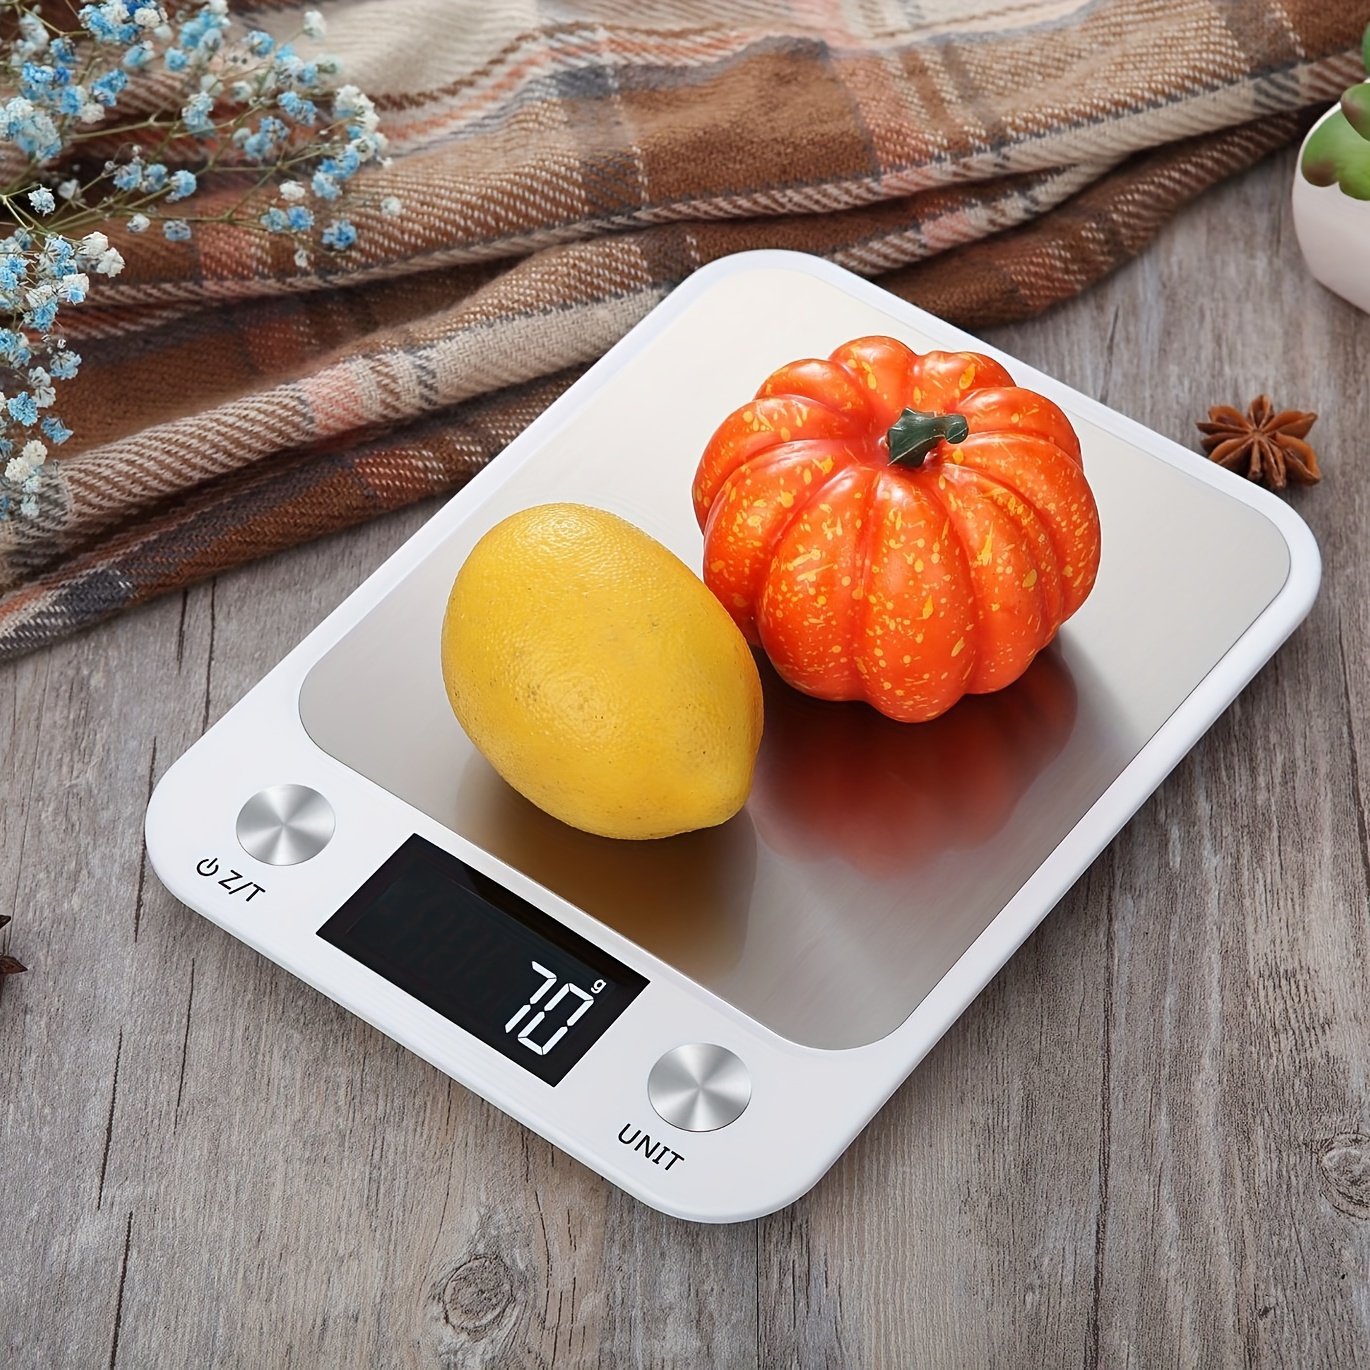 Digital Kitchen Food Cooking Scale Weight Balance in Pounds, Grams,  Ounces,& KG